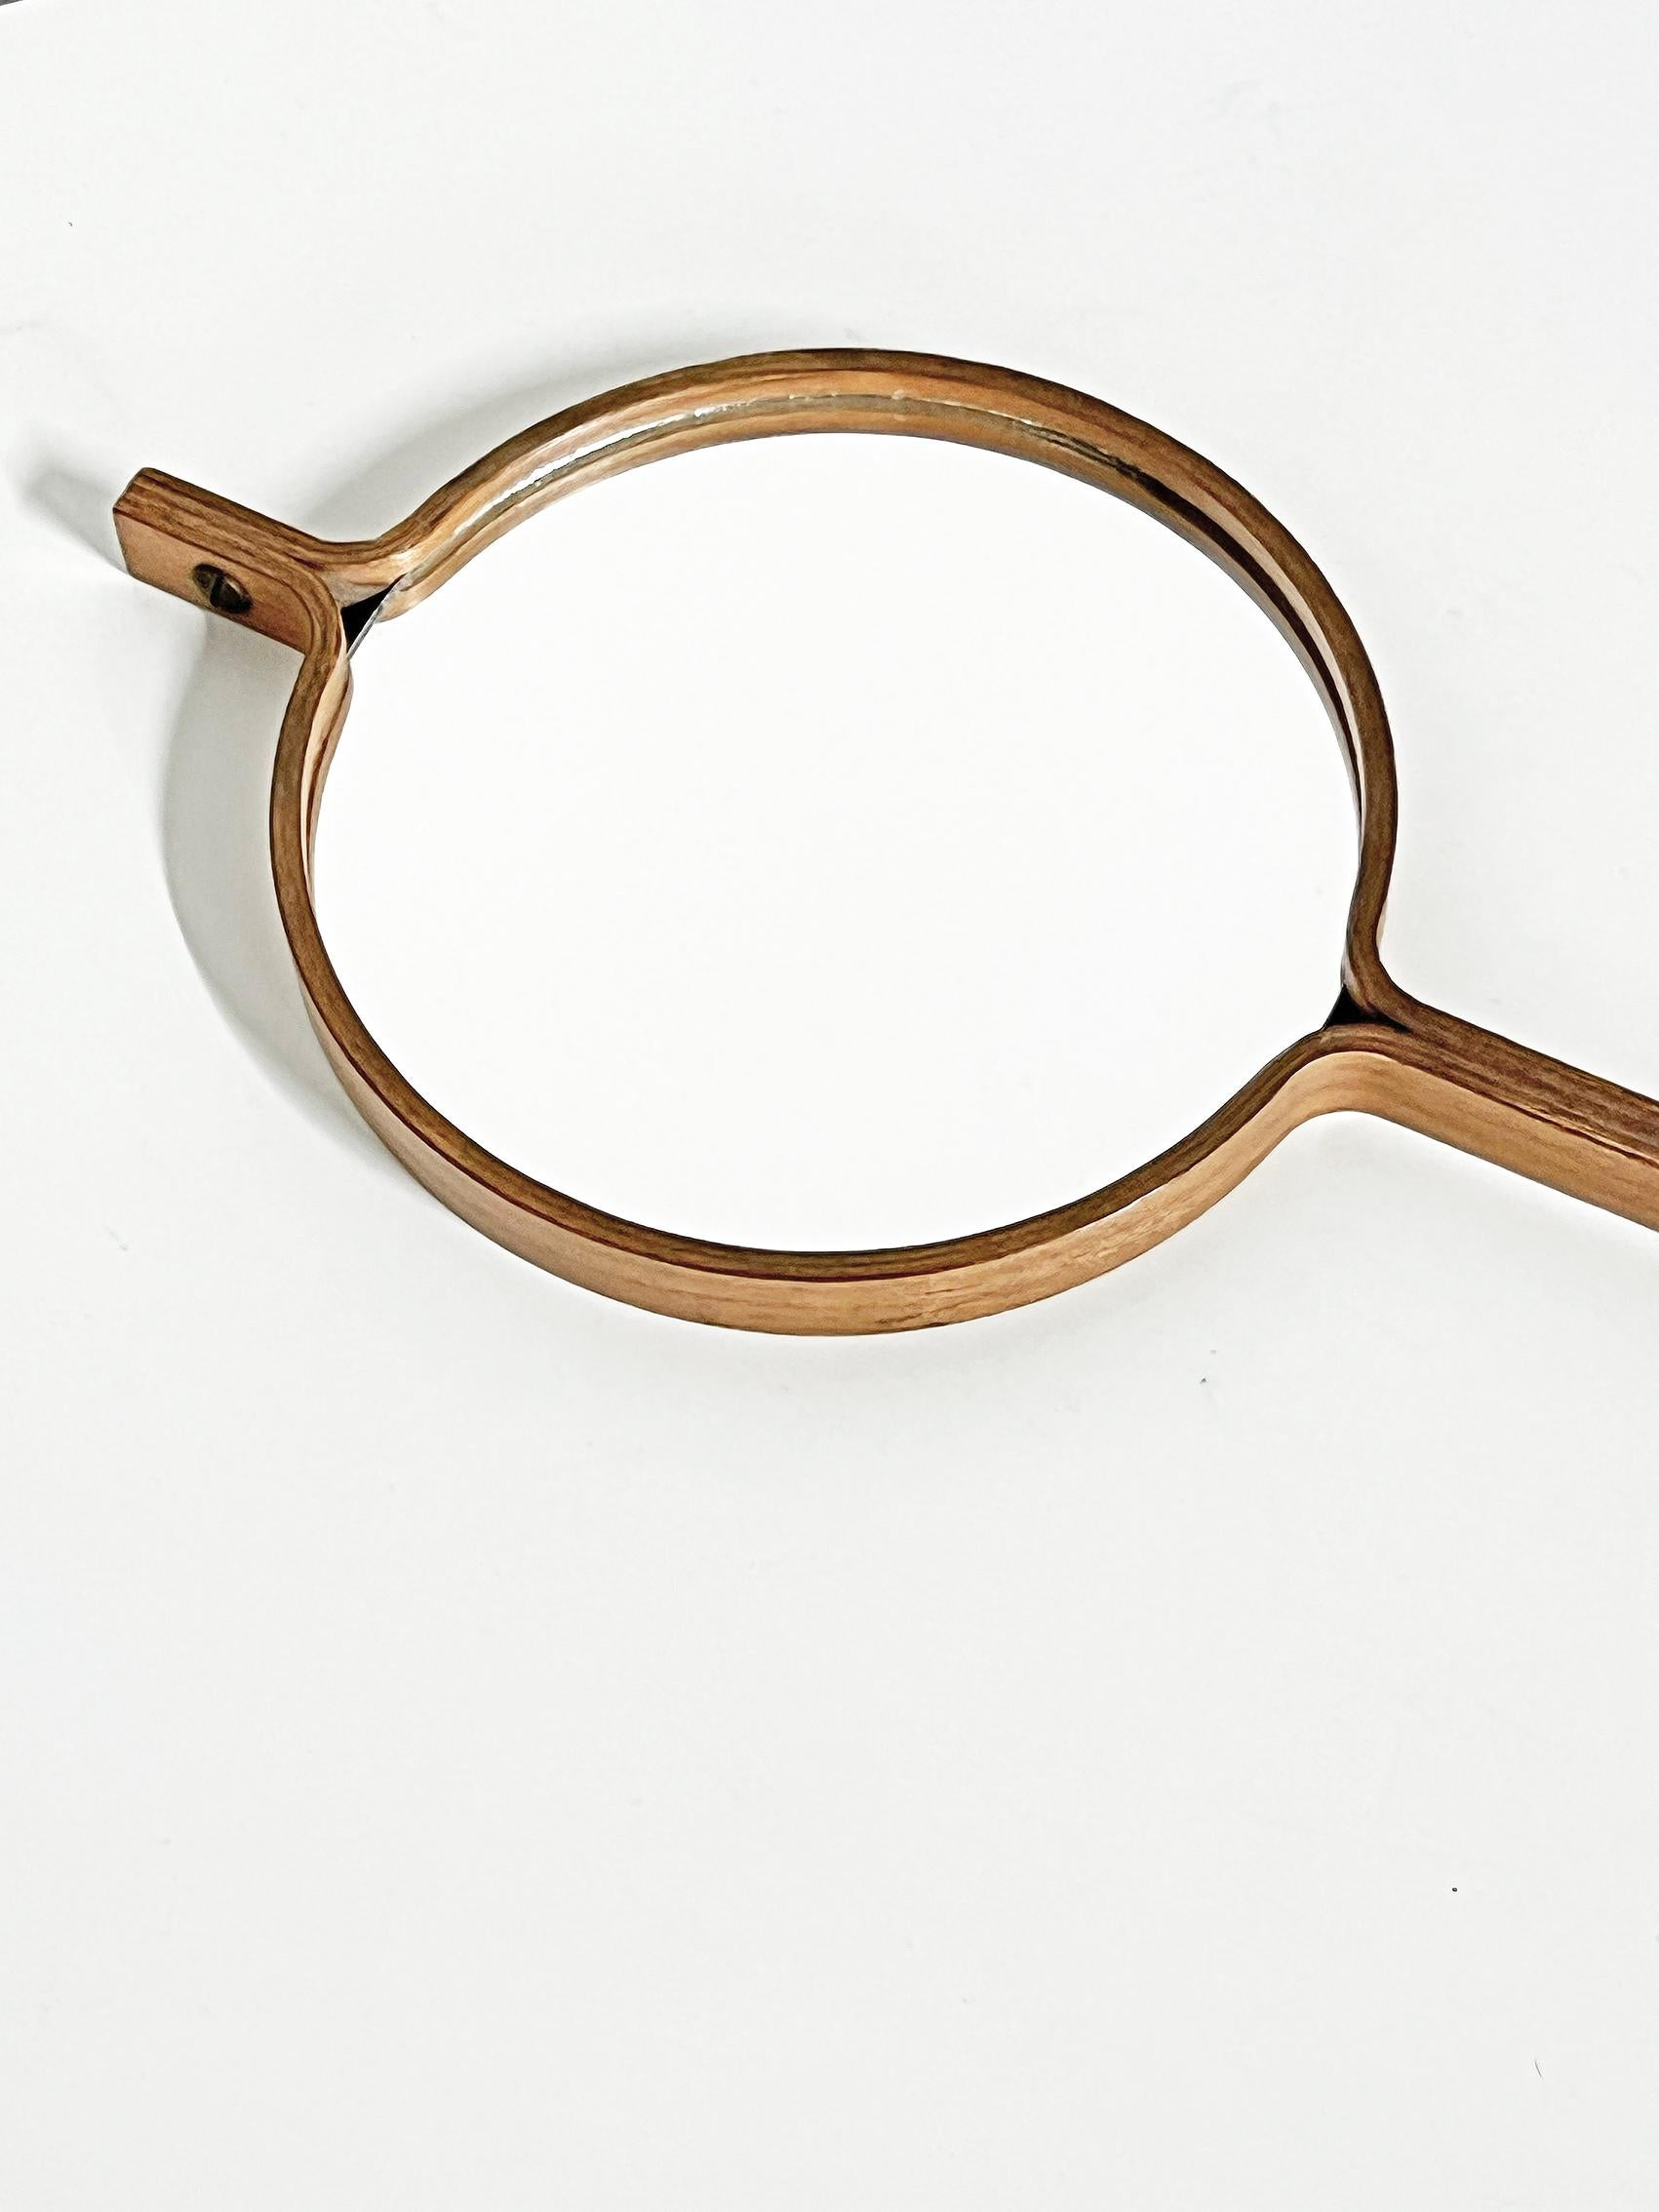 Danish Hand/Wall Mirror in Teak by Bech & Starup Denmark -1960s For Sale